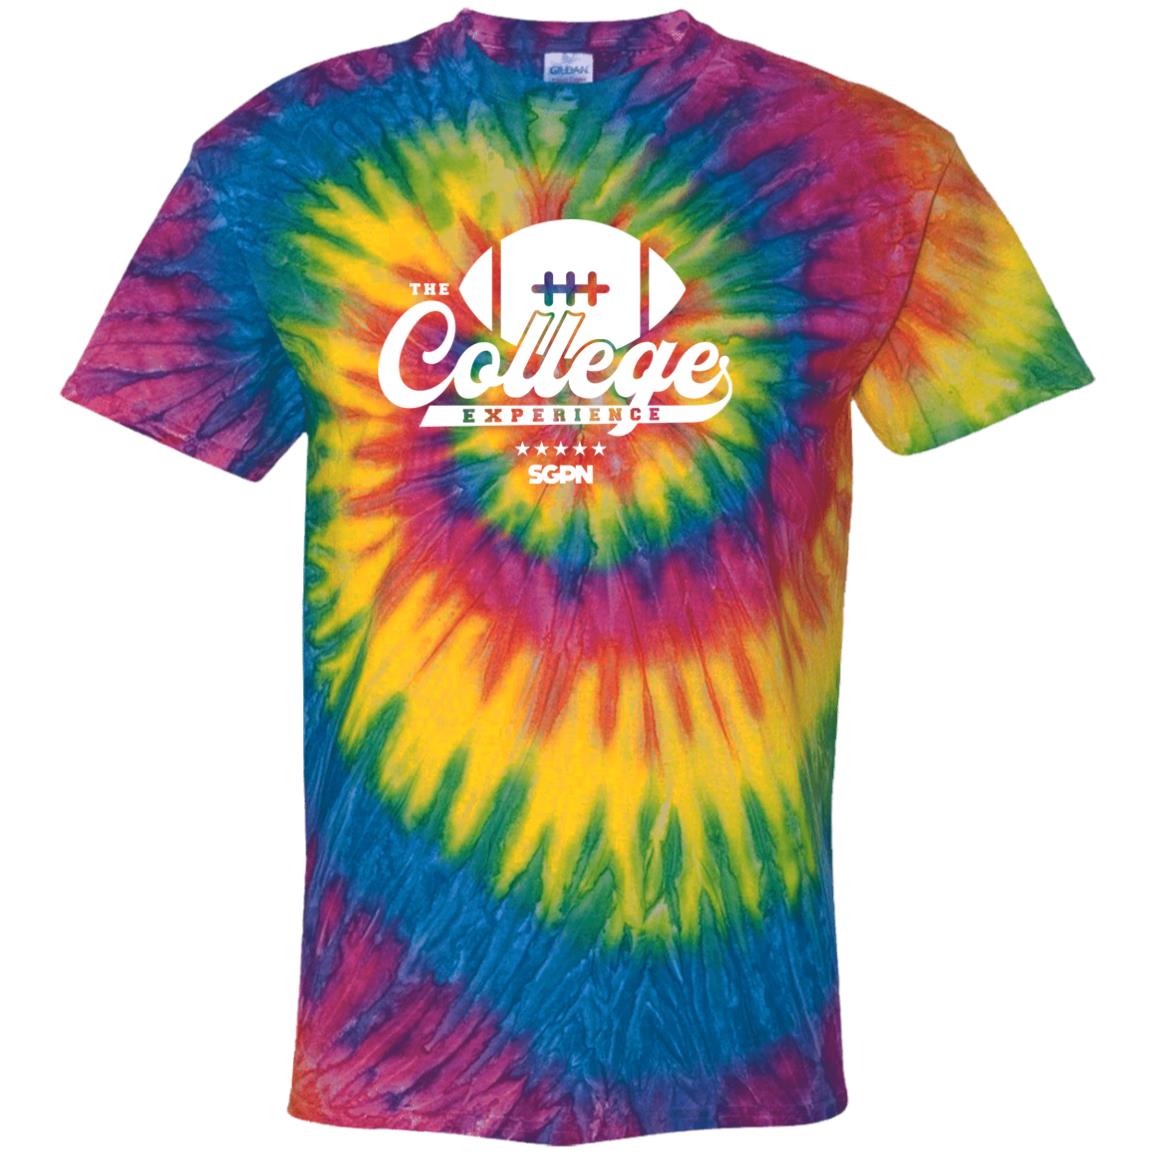 The College Experience - Football - Tie Dye T-Shirt